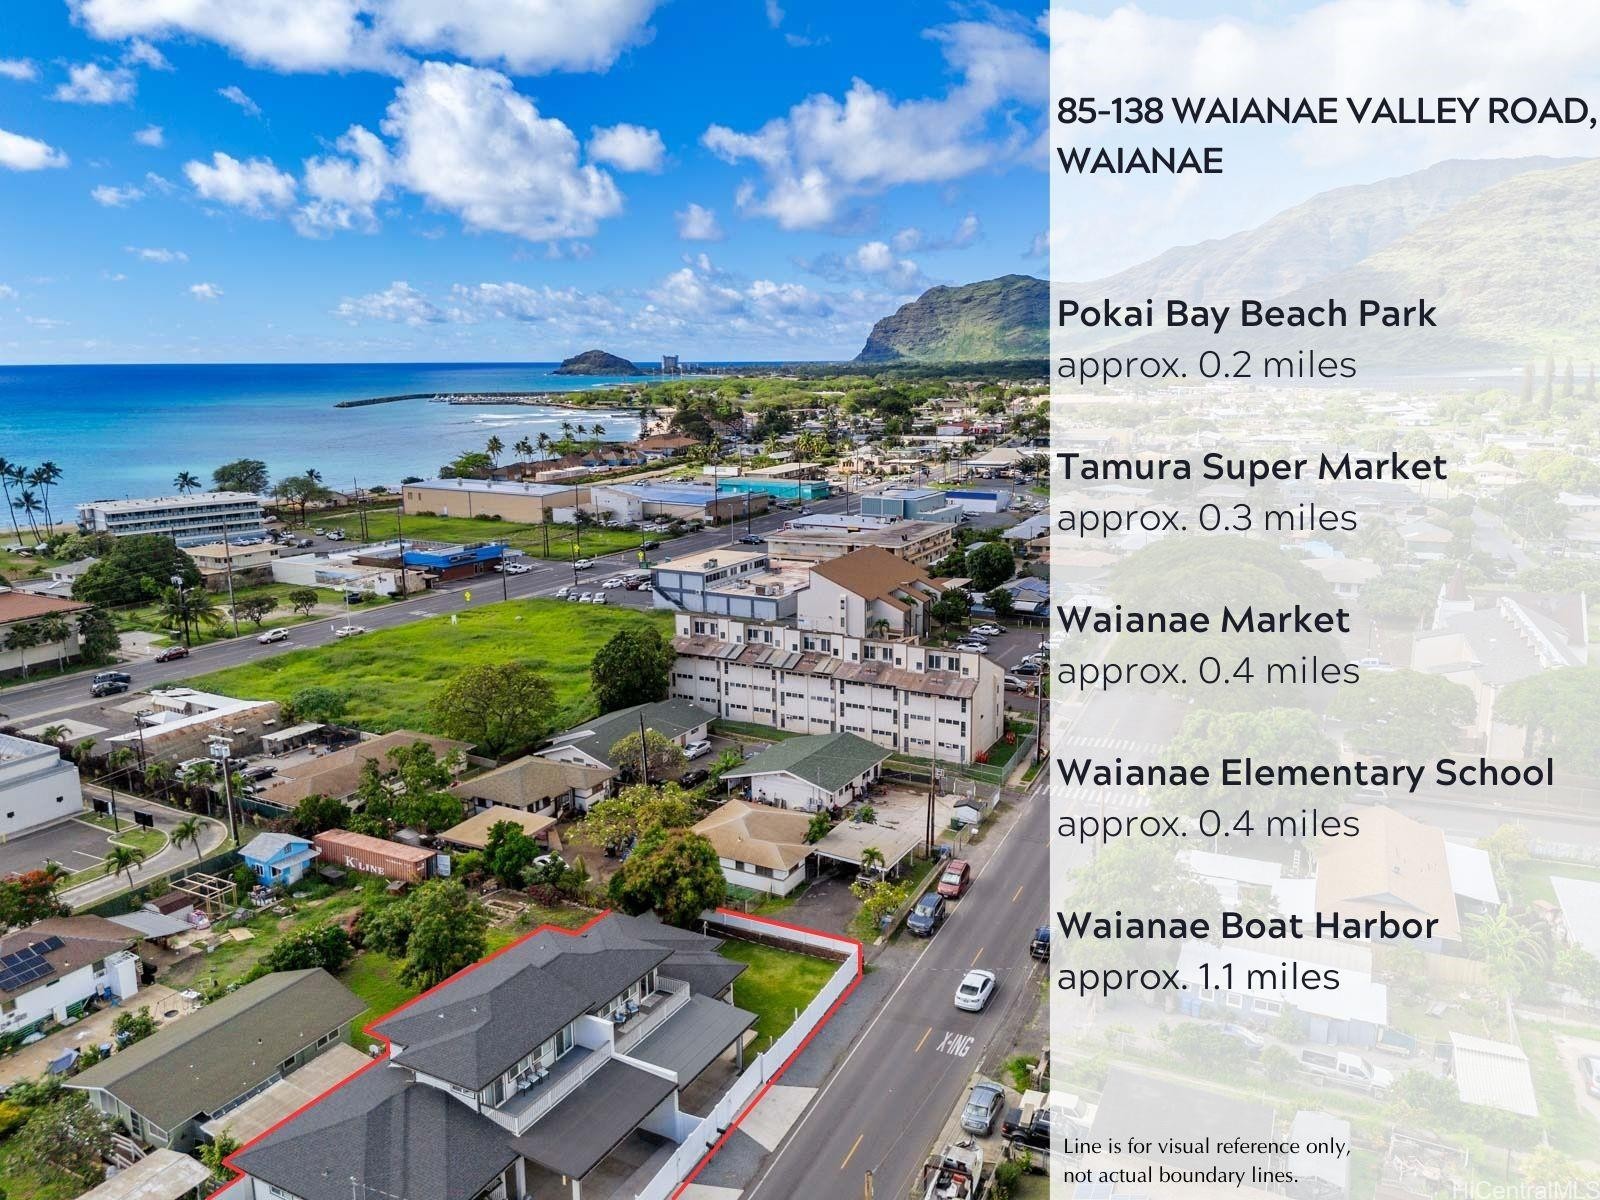 24. 85-138 Waianae Valley Road